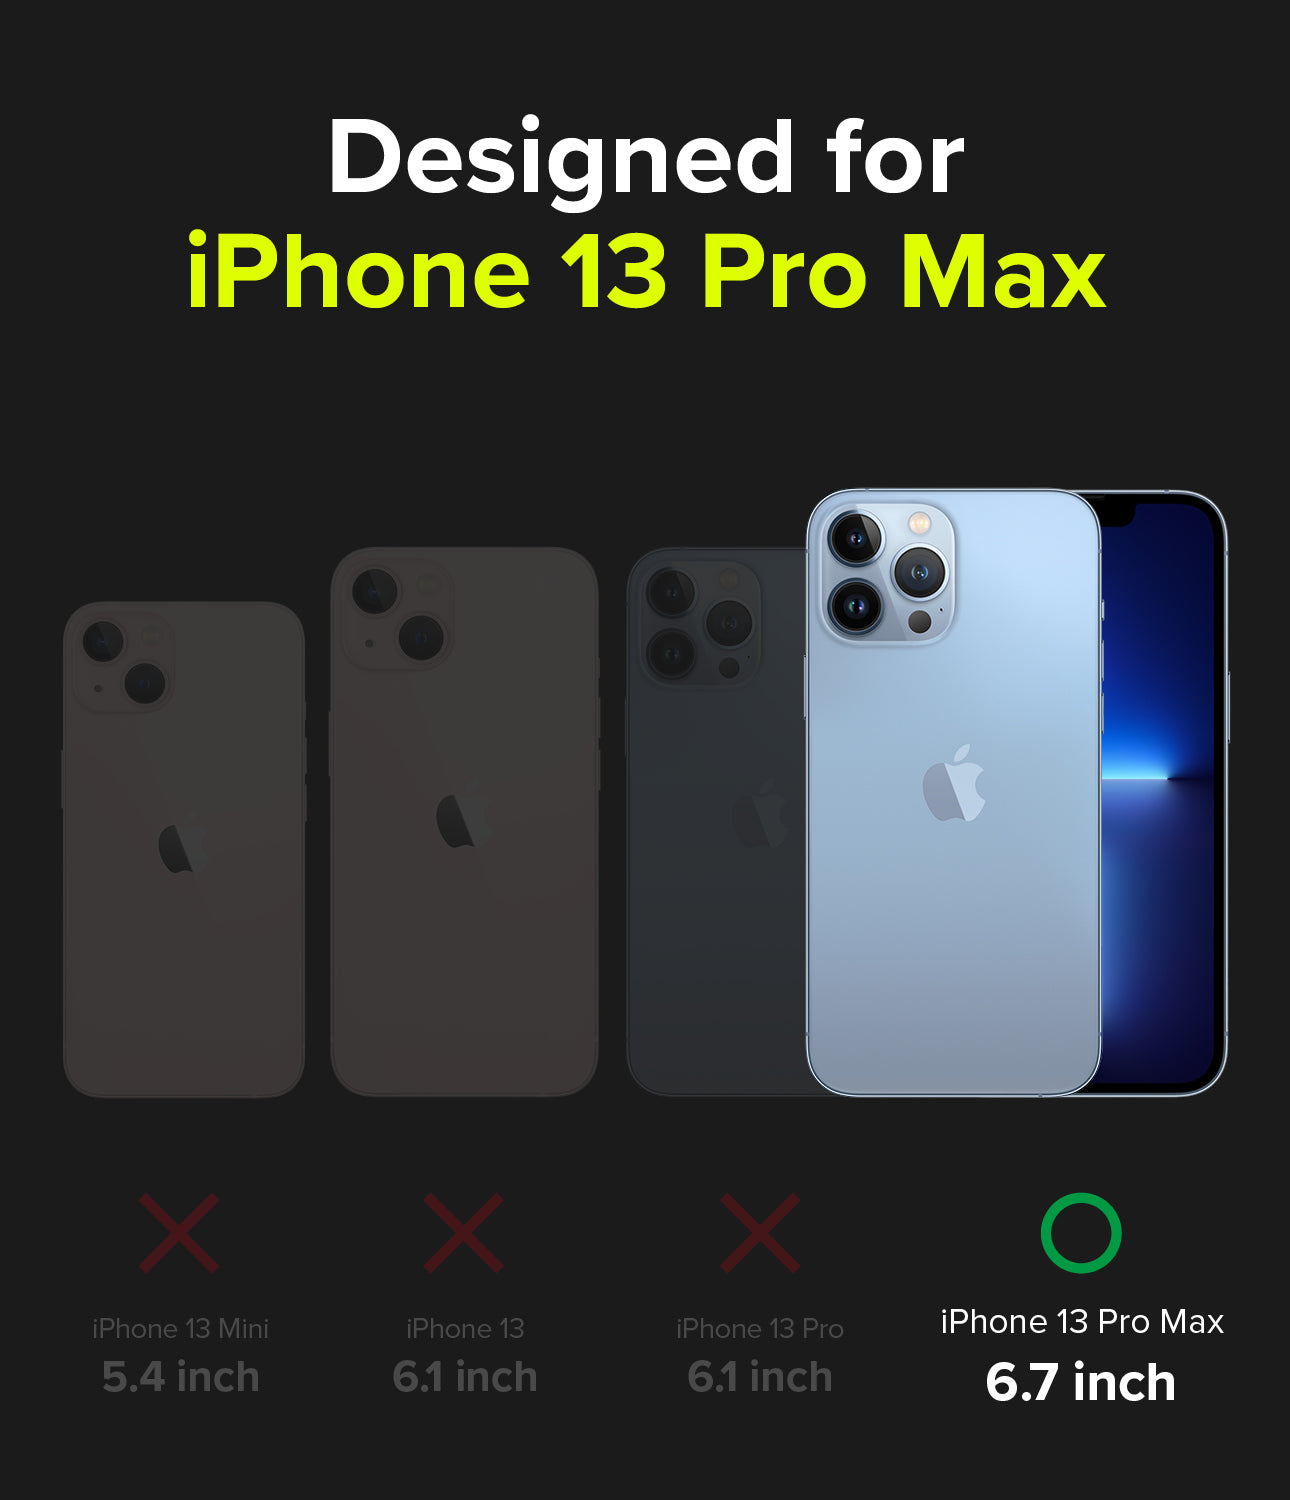 Designed for iPhone 13 Pro Max